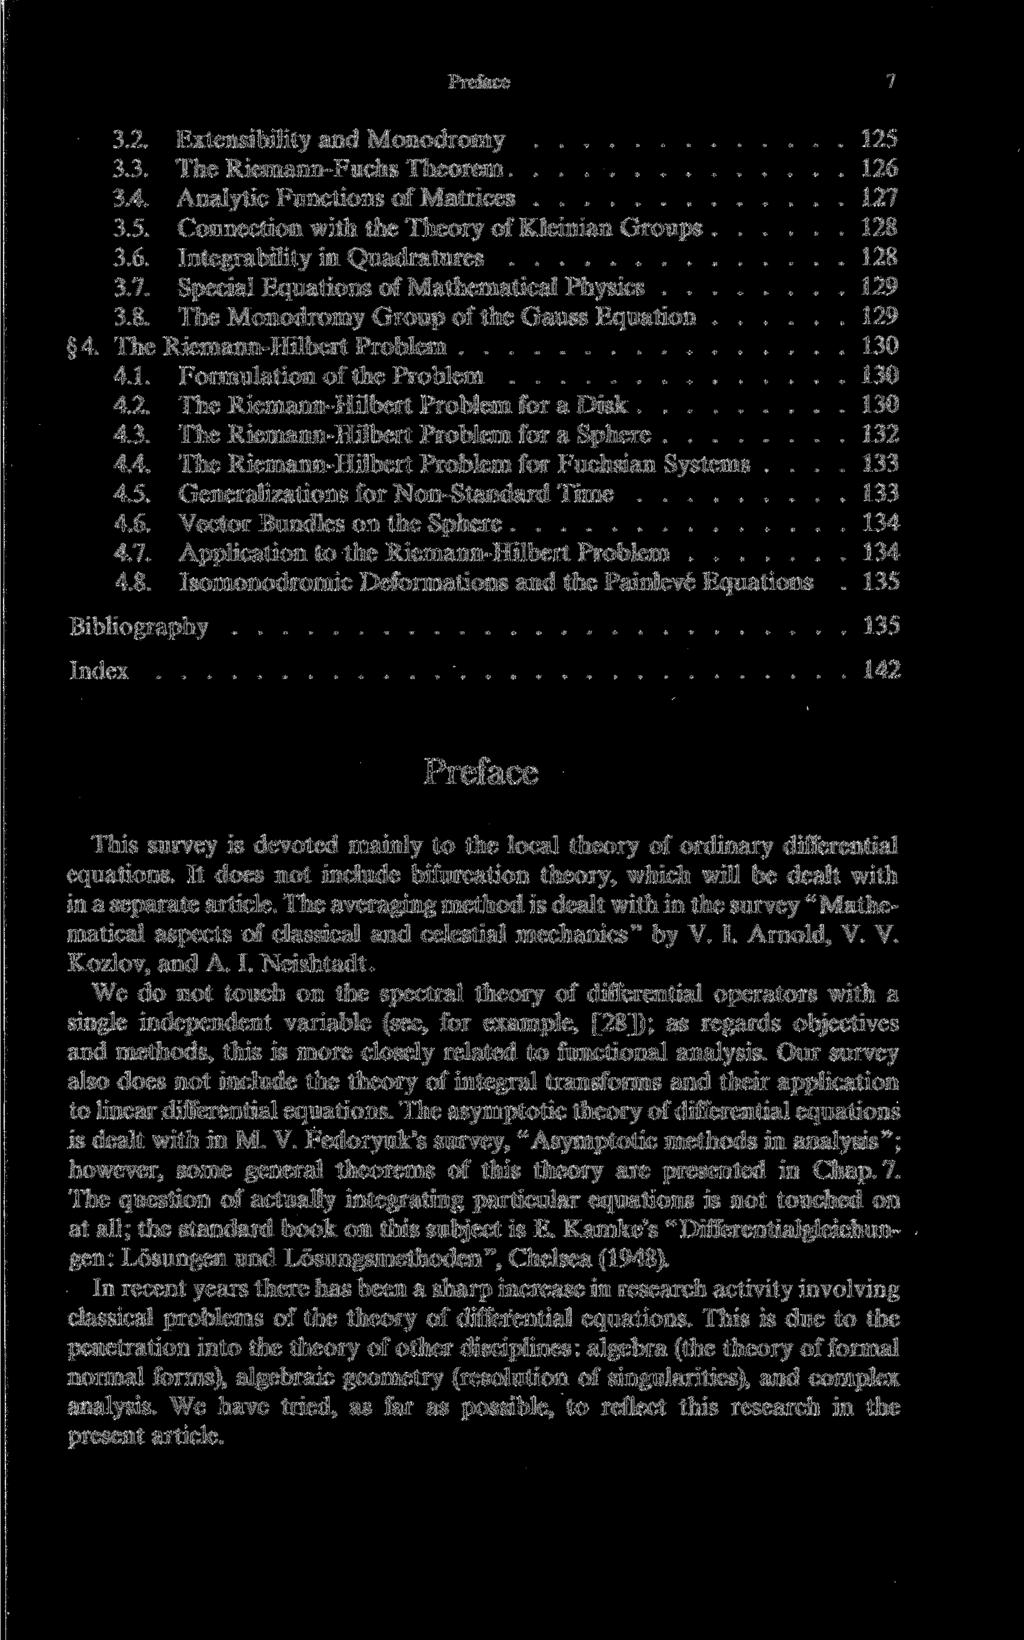 Preface 7 3.2. Extensibility and Monodromy 125 3.3. The Riemann-Fuchs Theorem 126 3.4. Analytic Functions of Matrices 127 3.5. Connection with the Theory of Kleinian Groups 128 3.6. Integrability in Quadratures 128 3.